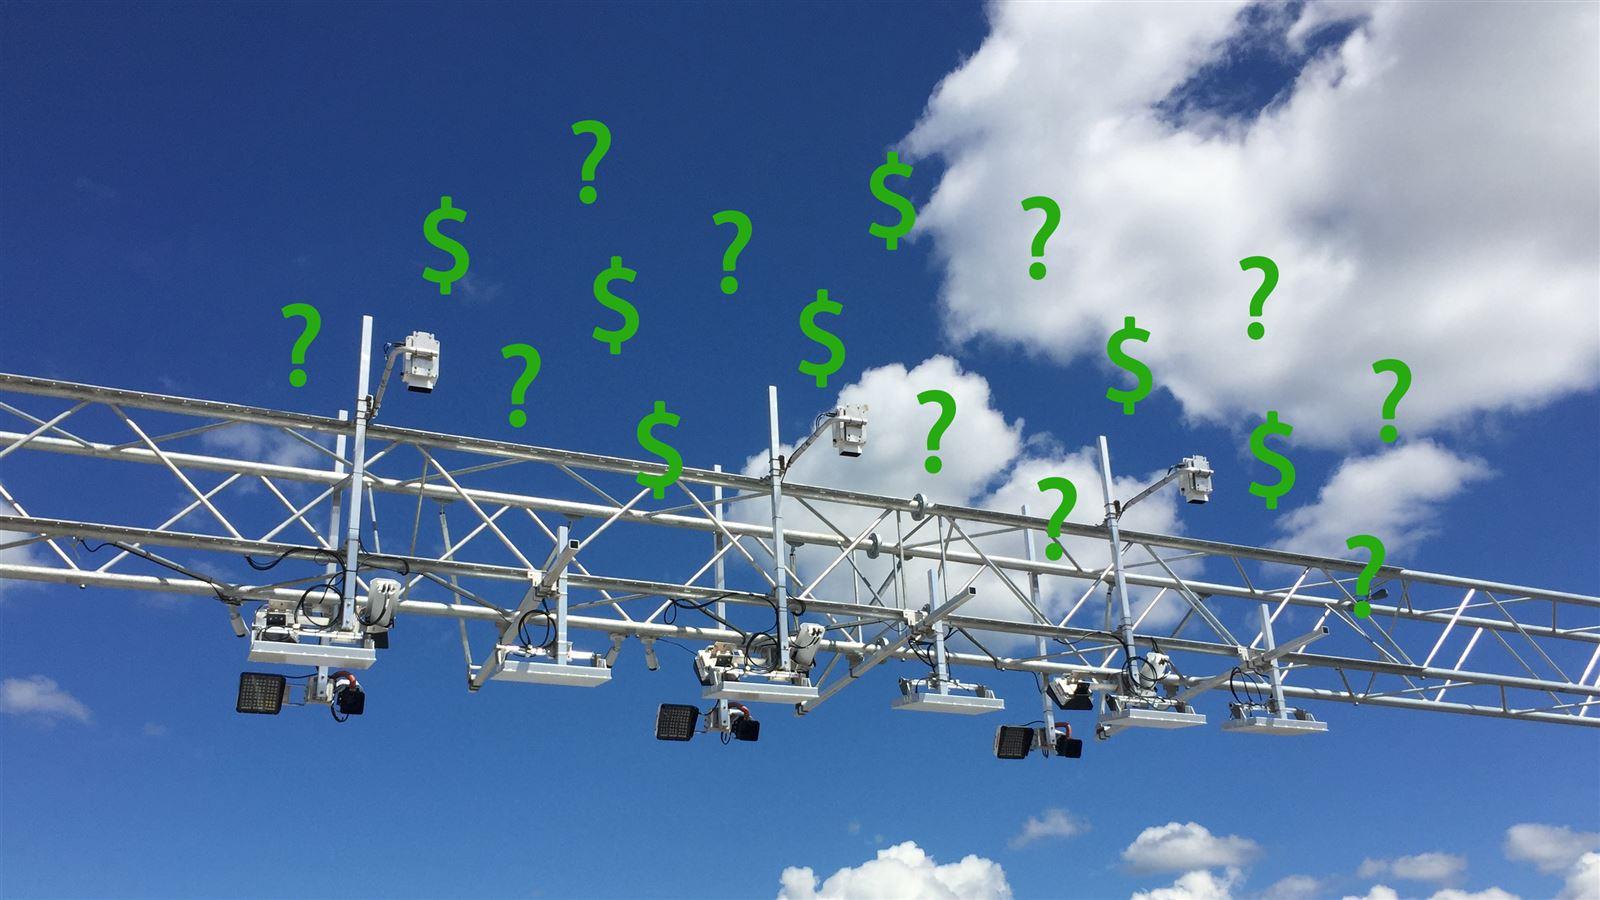 Toll Gantry with question marks and dollar signs